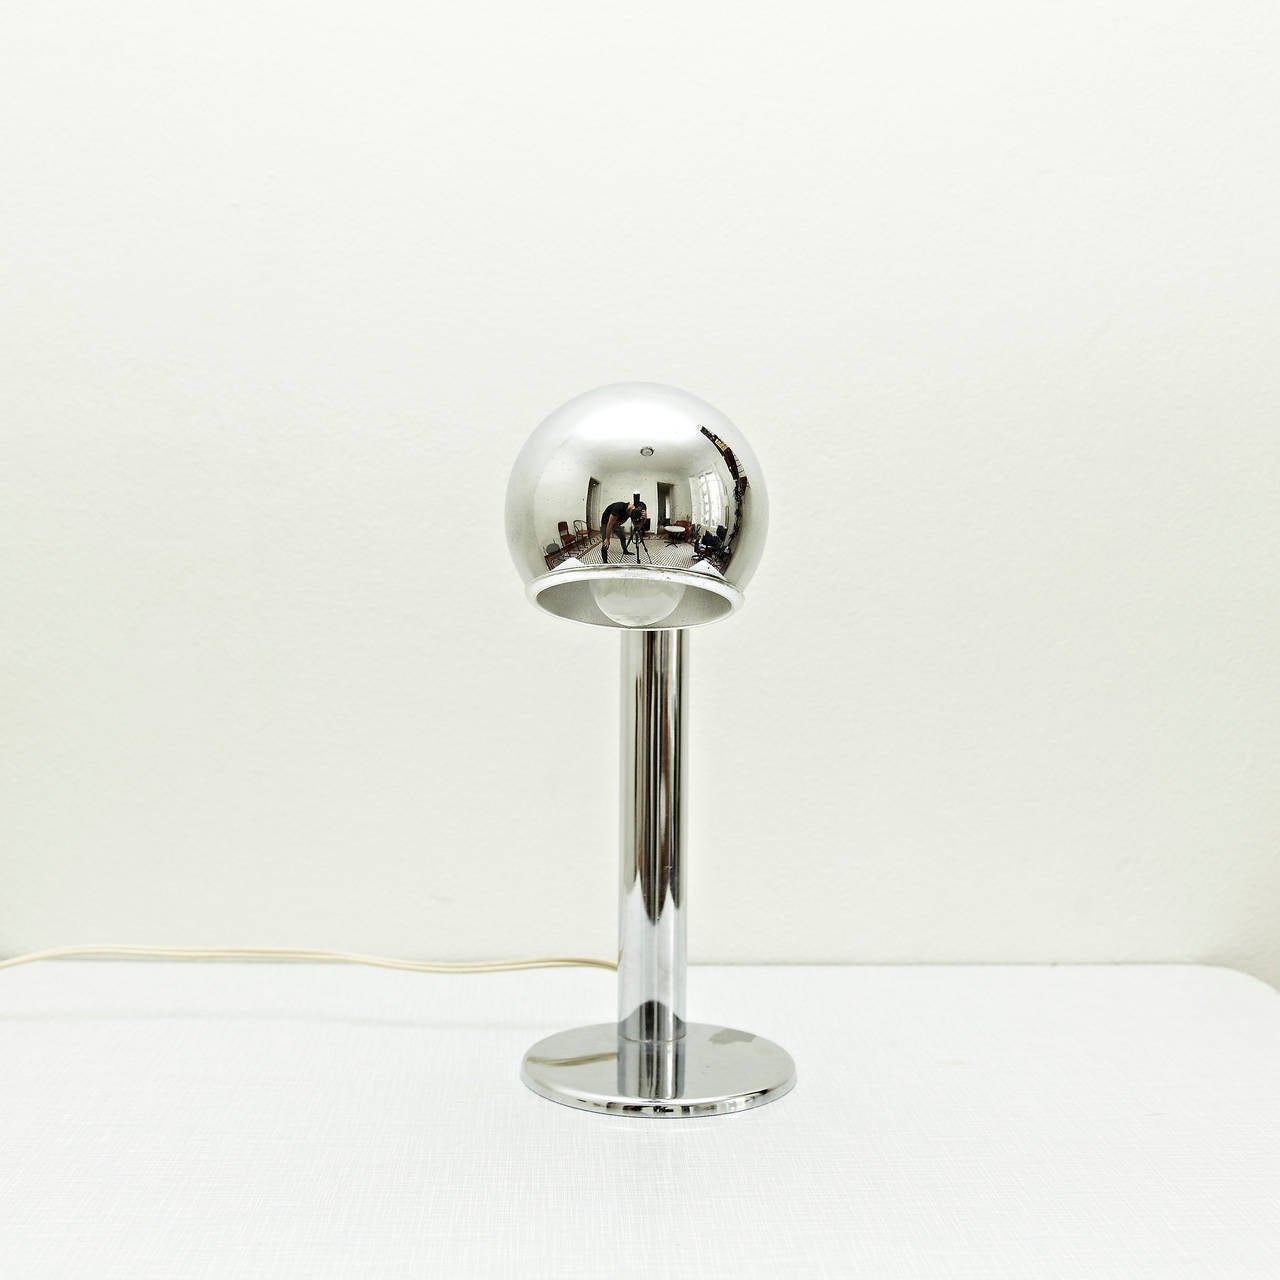 Chrome table lamp model T414 by Luci, manufactured in Italy, circa 1960.
Base and structure in chromed metal and a magnet that connects the shade to the structure.

In great original condition, with minor wear consistent with age and use,